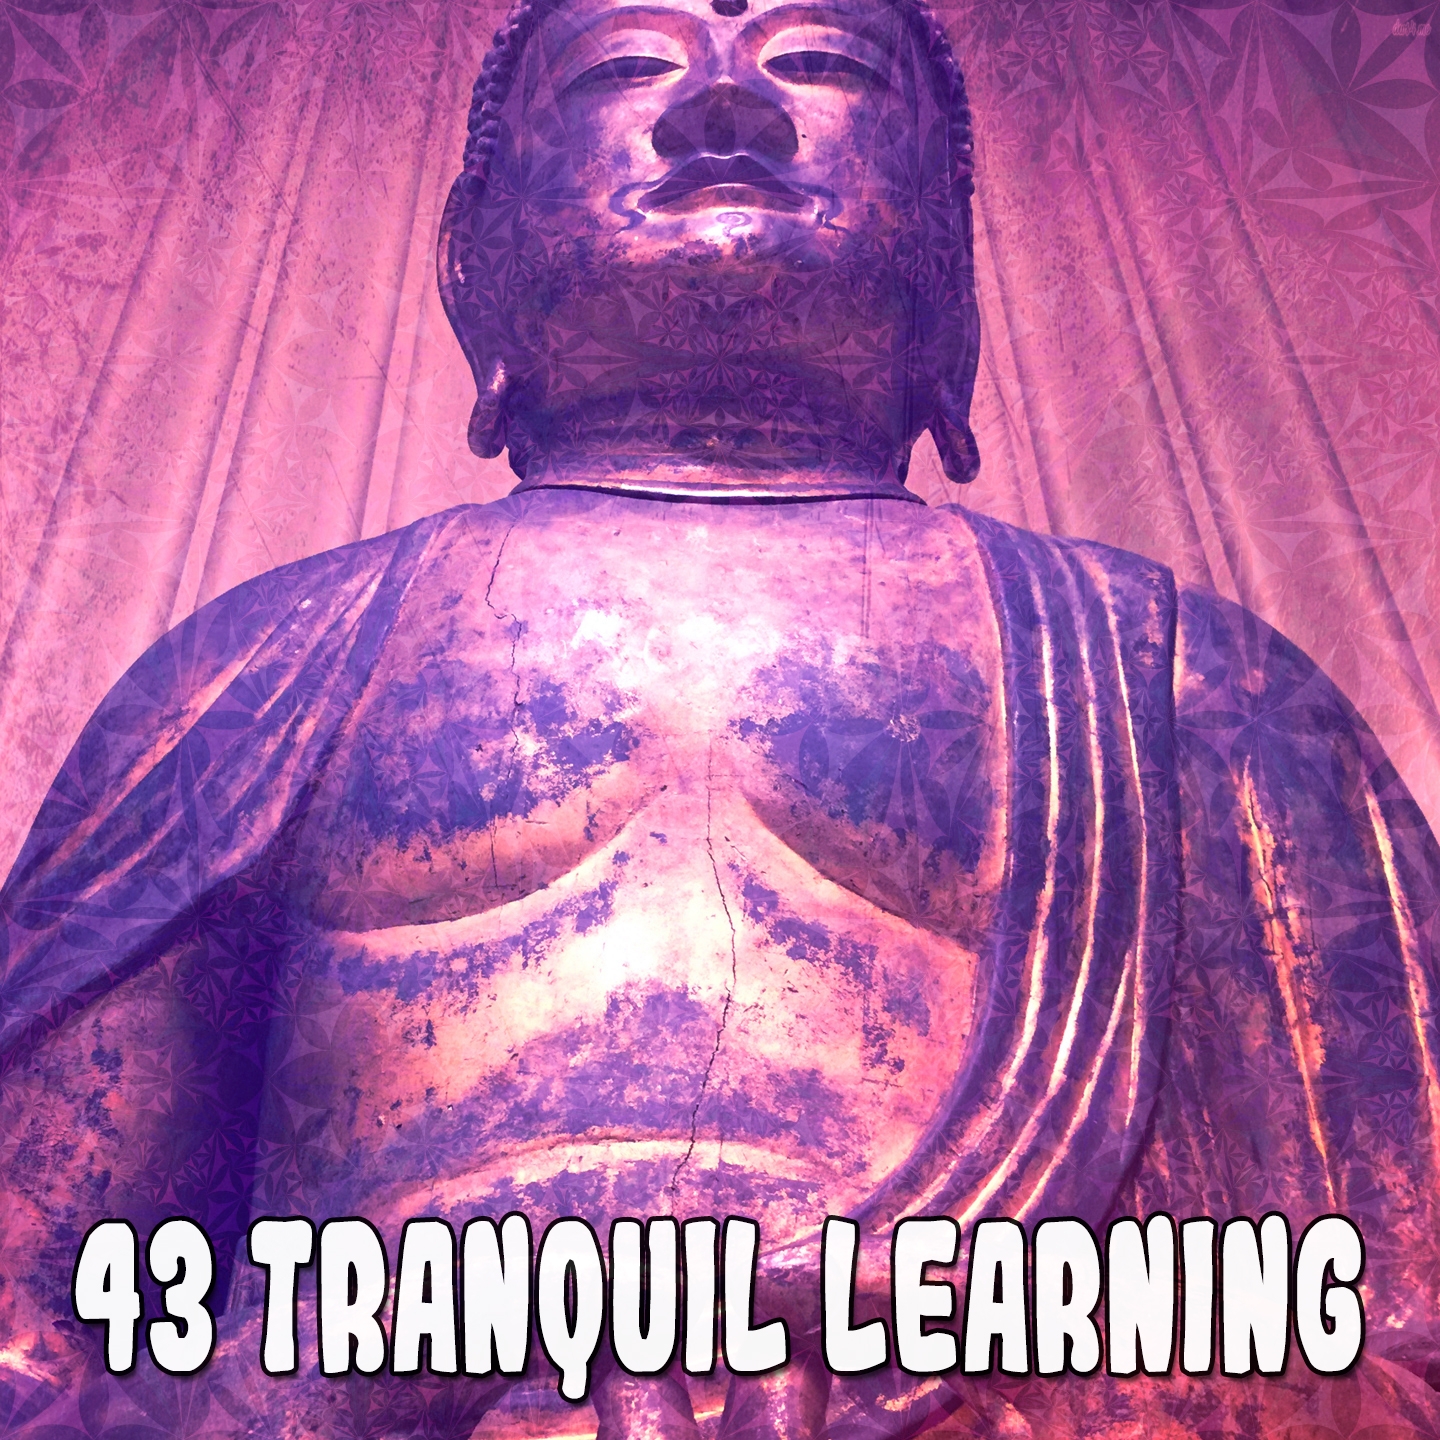 43 Tranquil Learning